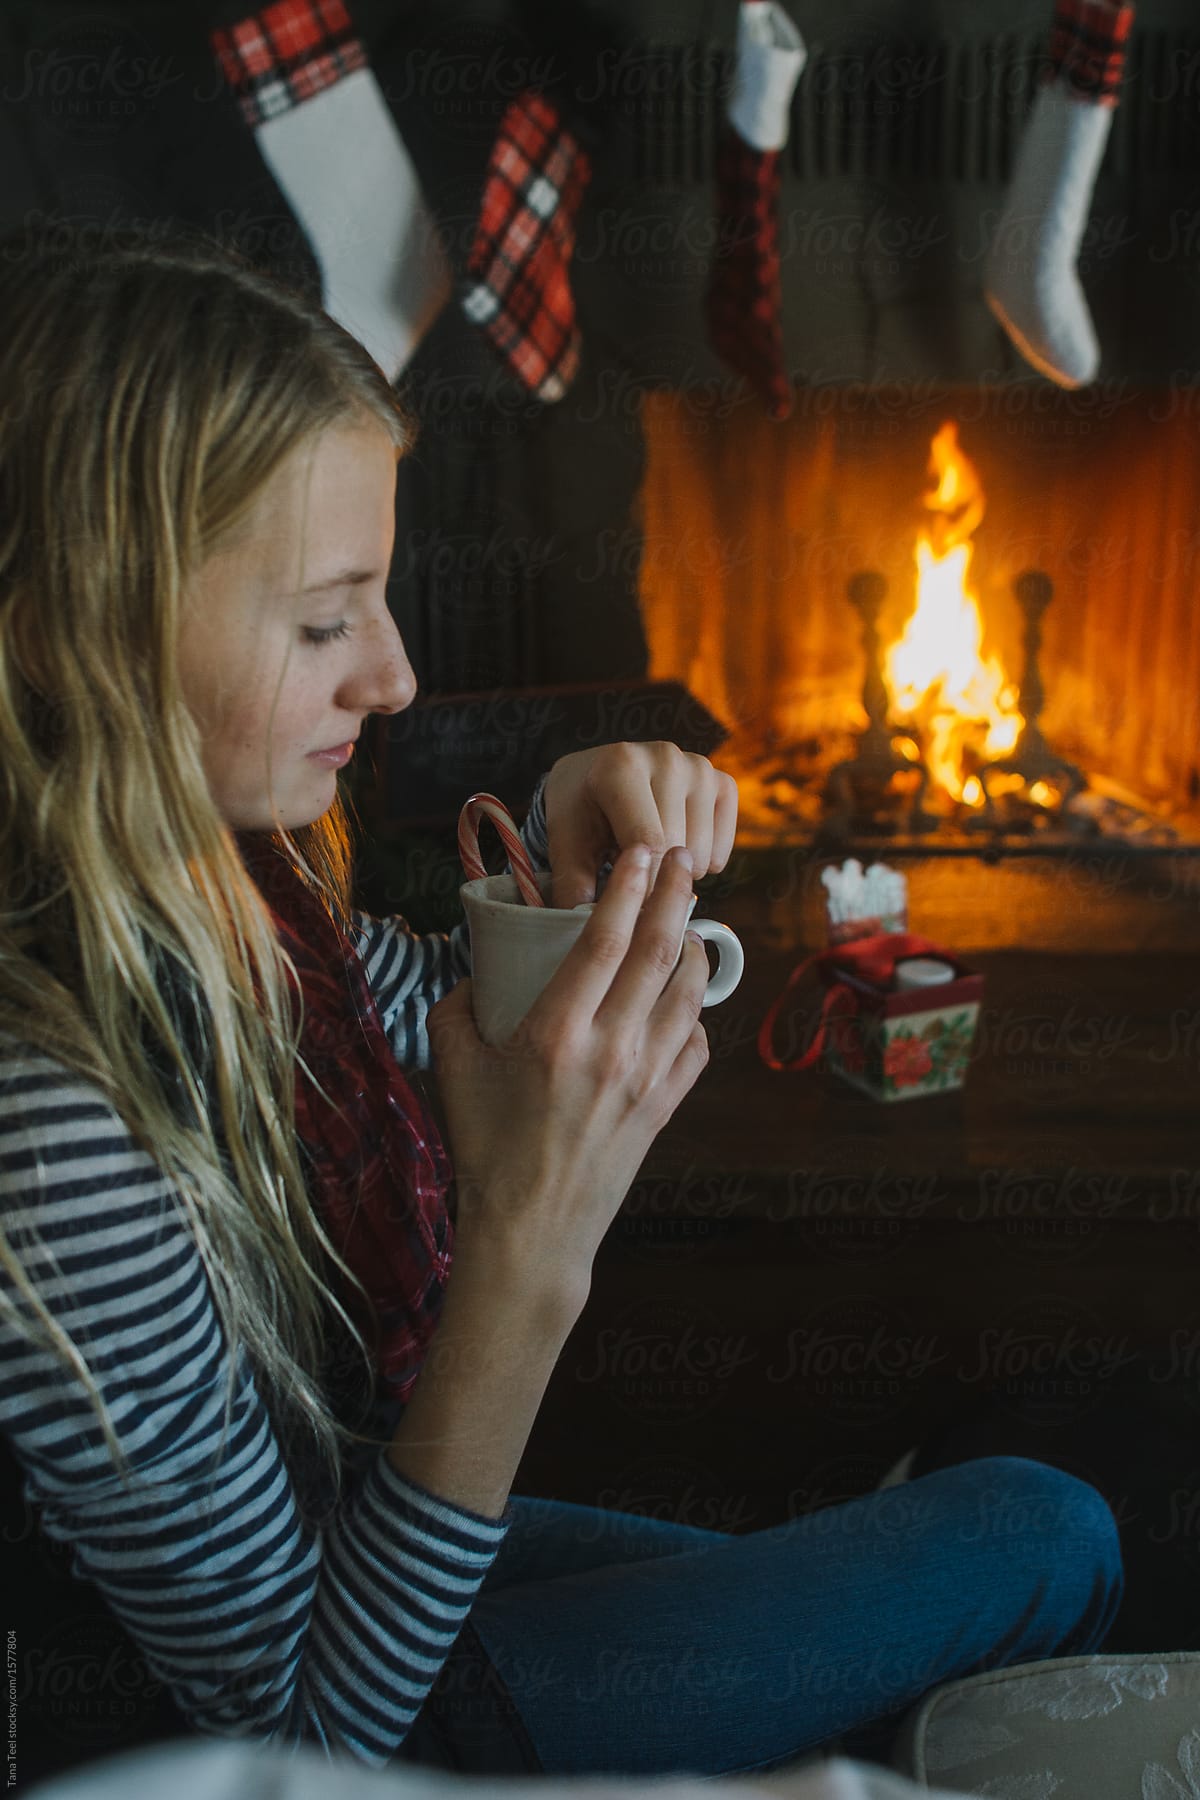 teenager holds cup of coco while sitting near fireplace during Christmas holiday